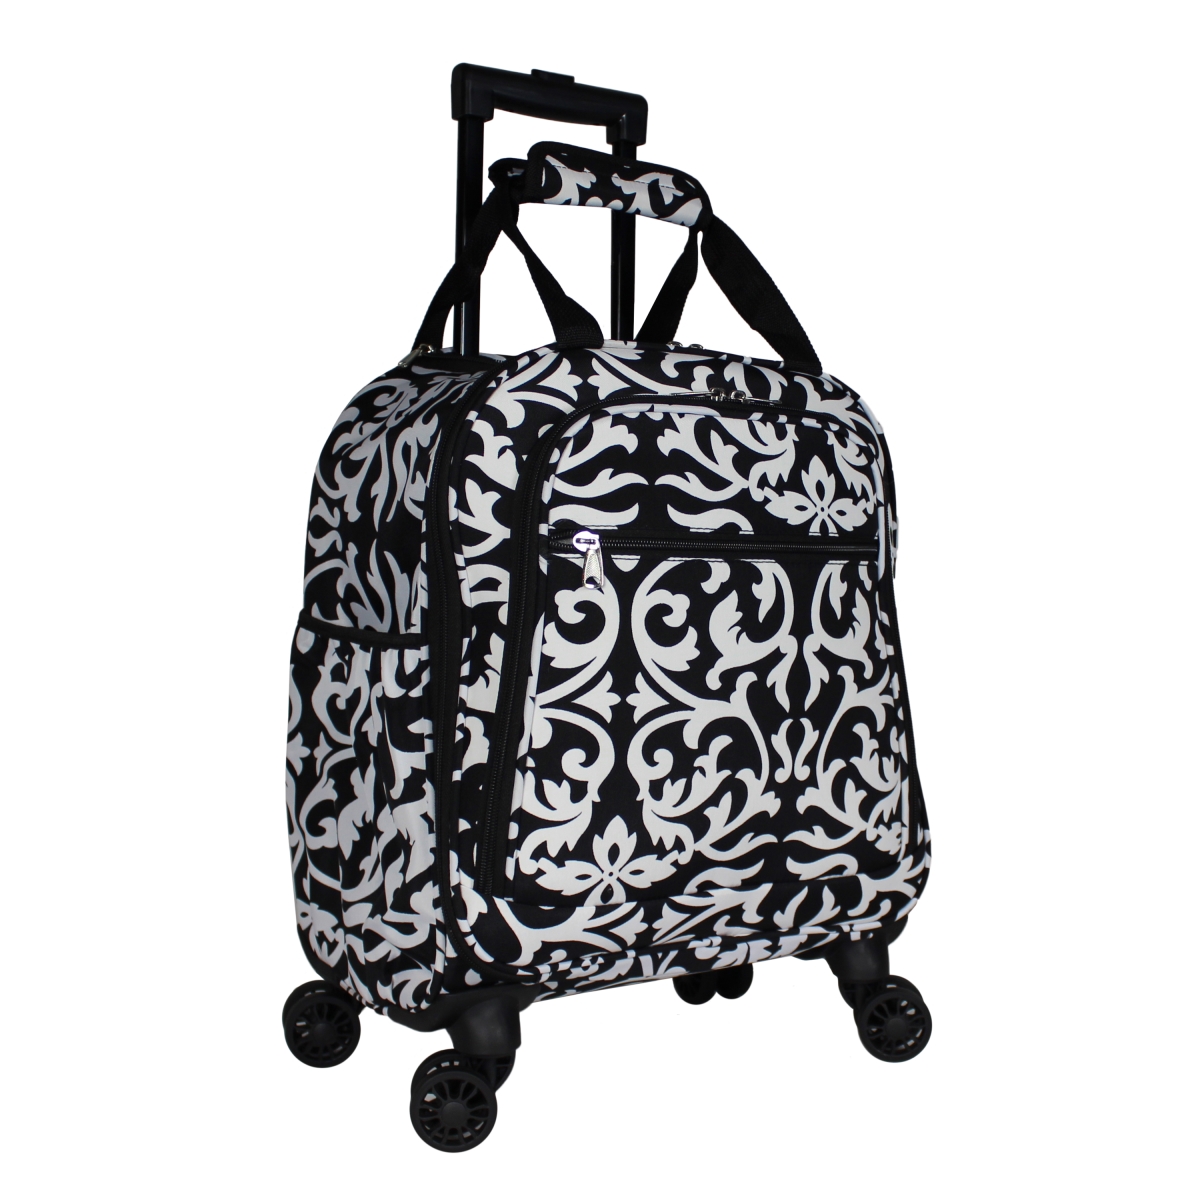 815501-501-b 18 In. Prints Spinner Carry-on Luggage, Black Trim Damask